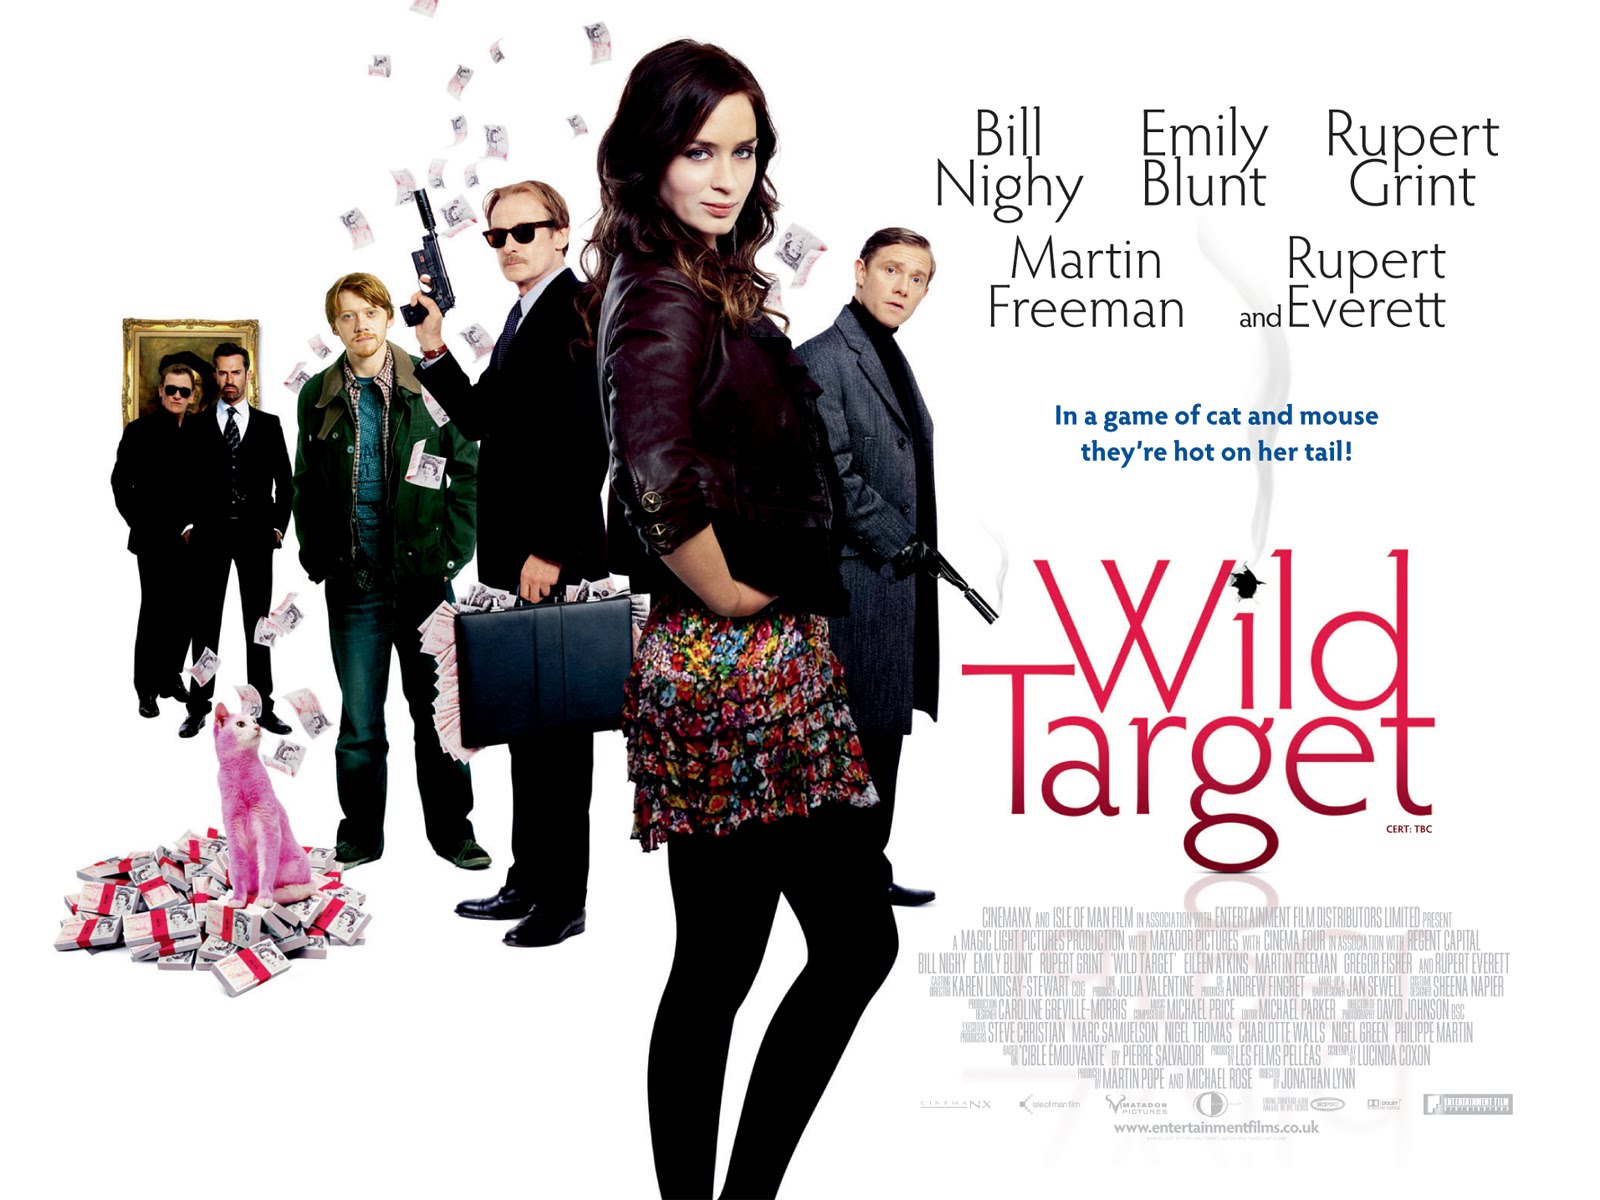 You are currently viewing Notes On A Film: Wild Target